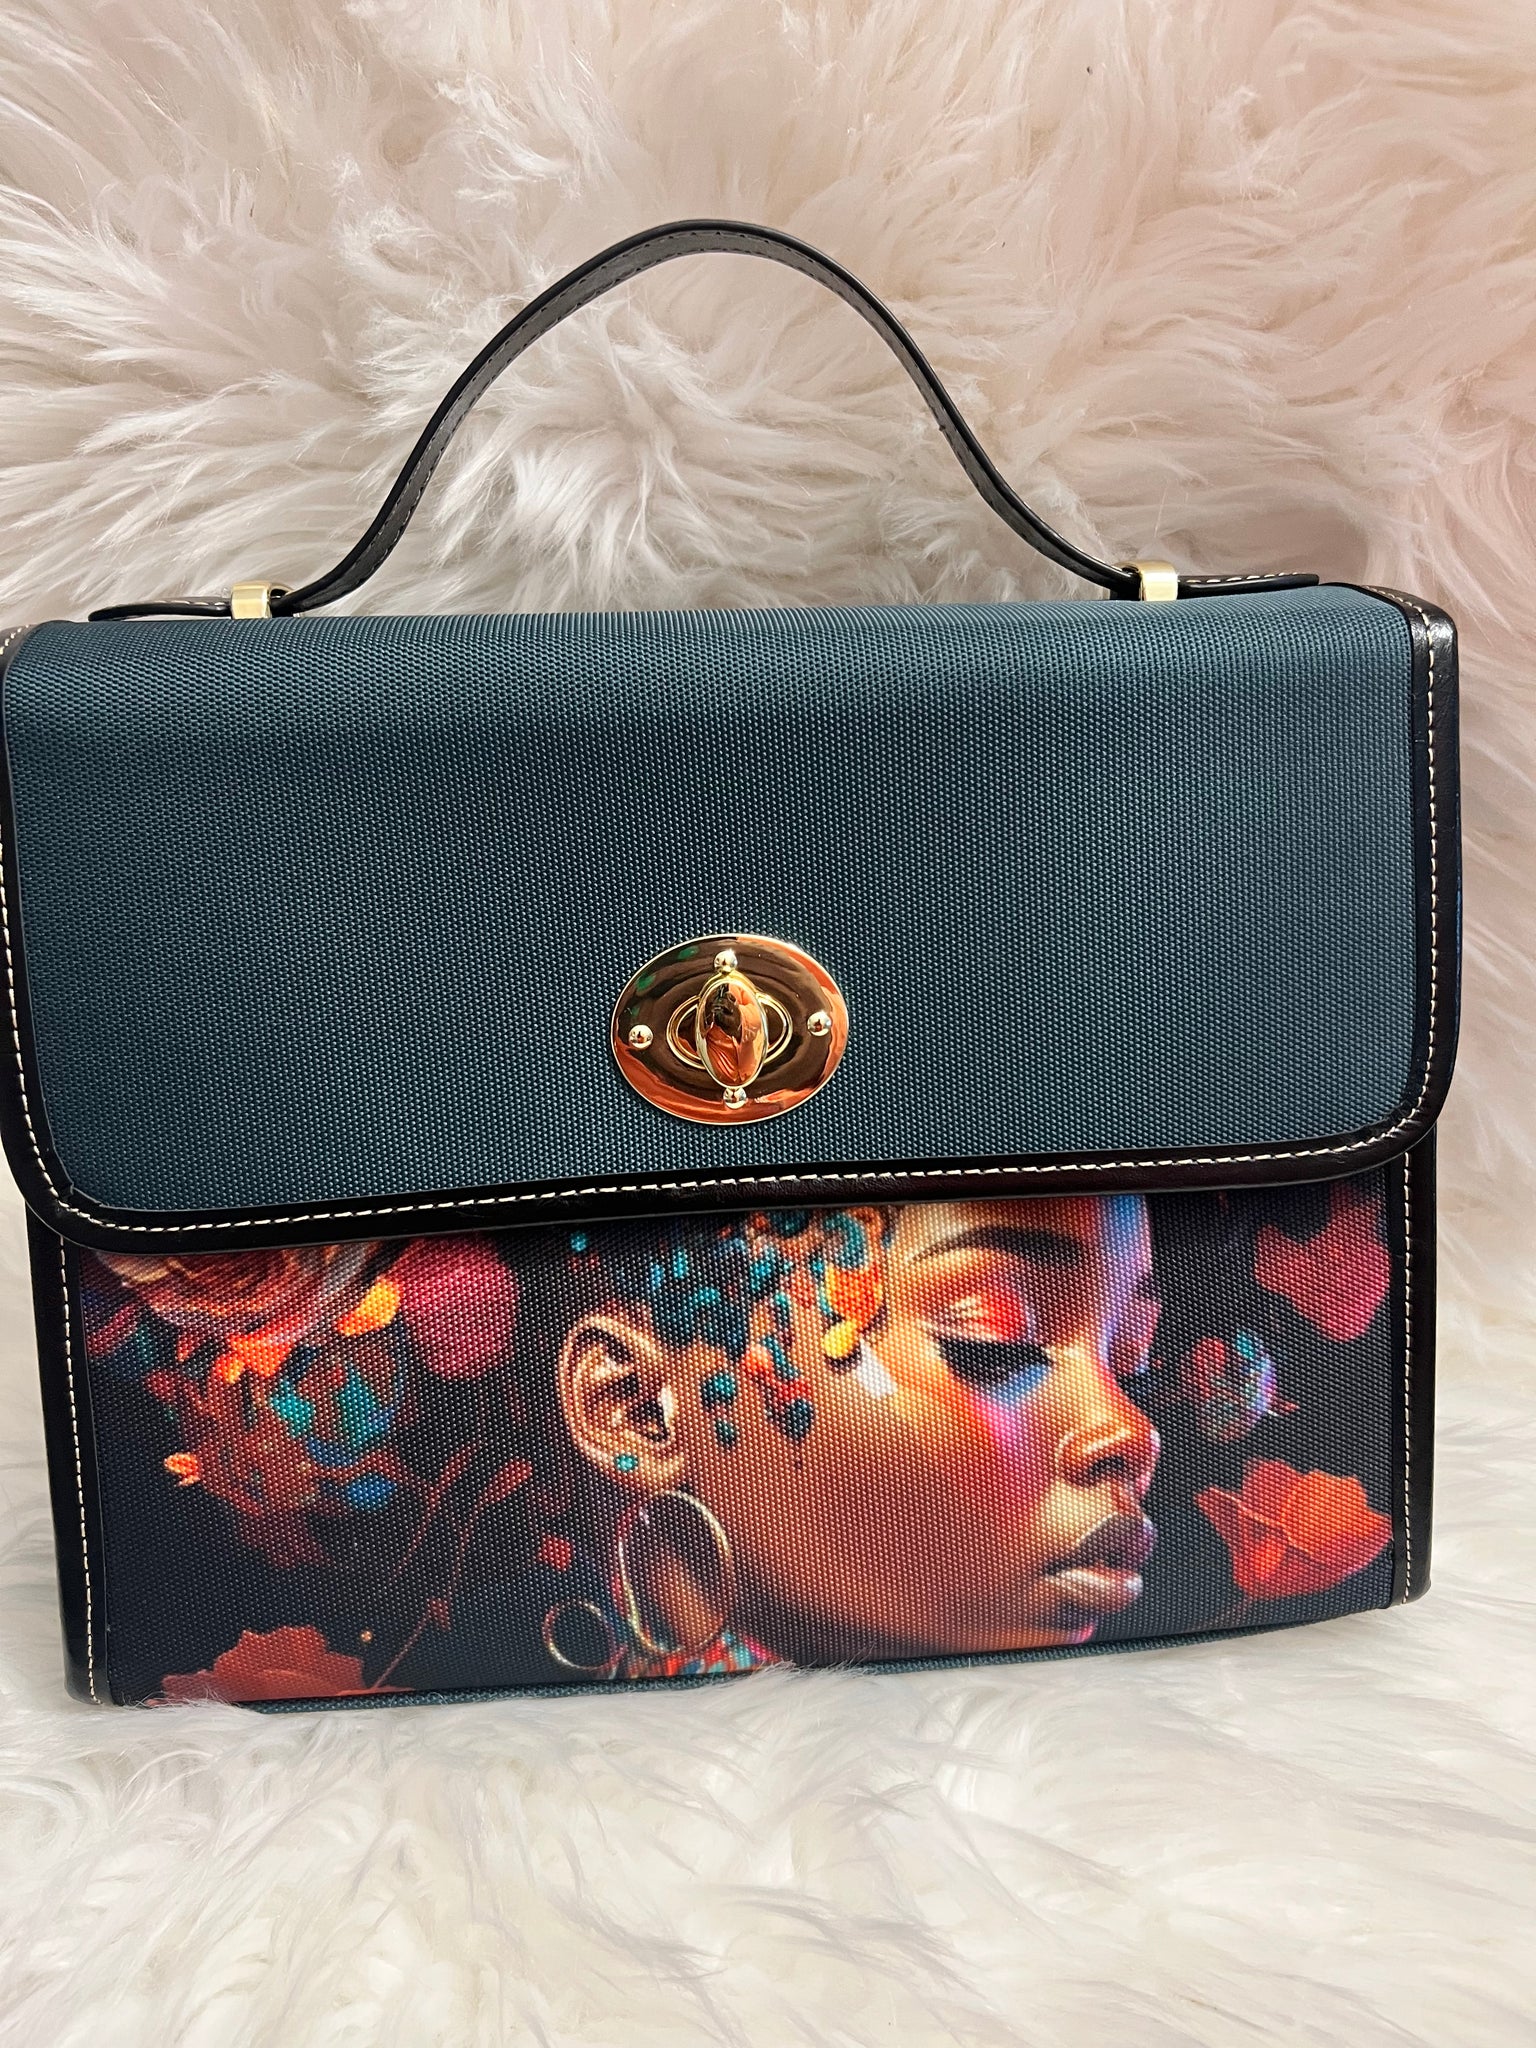 Black girls with flowers bag